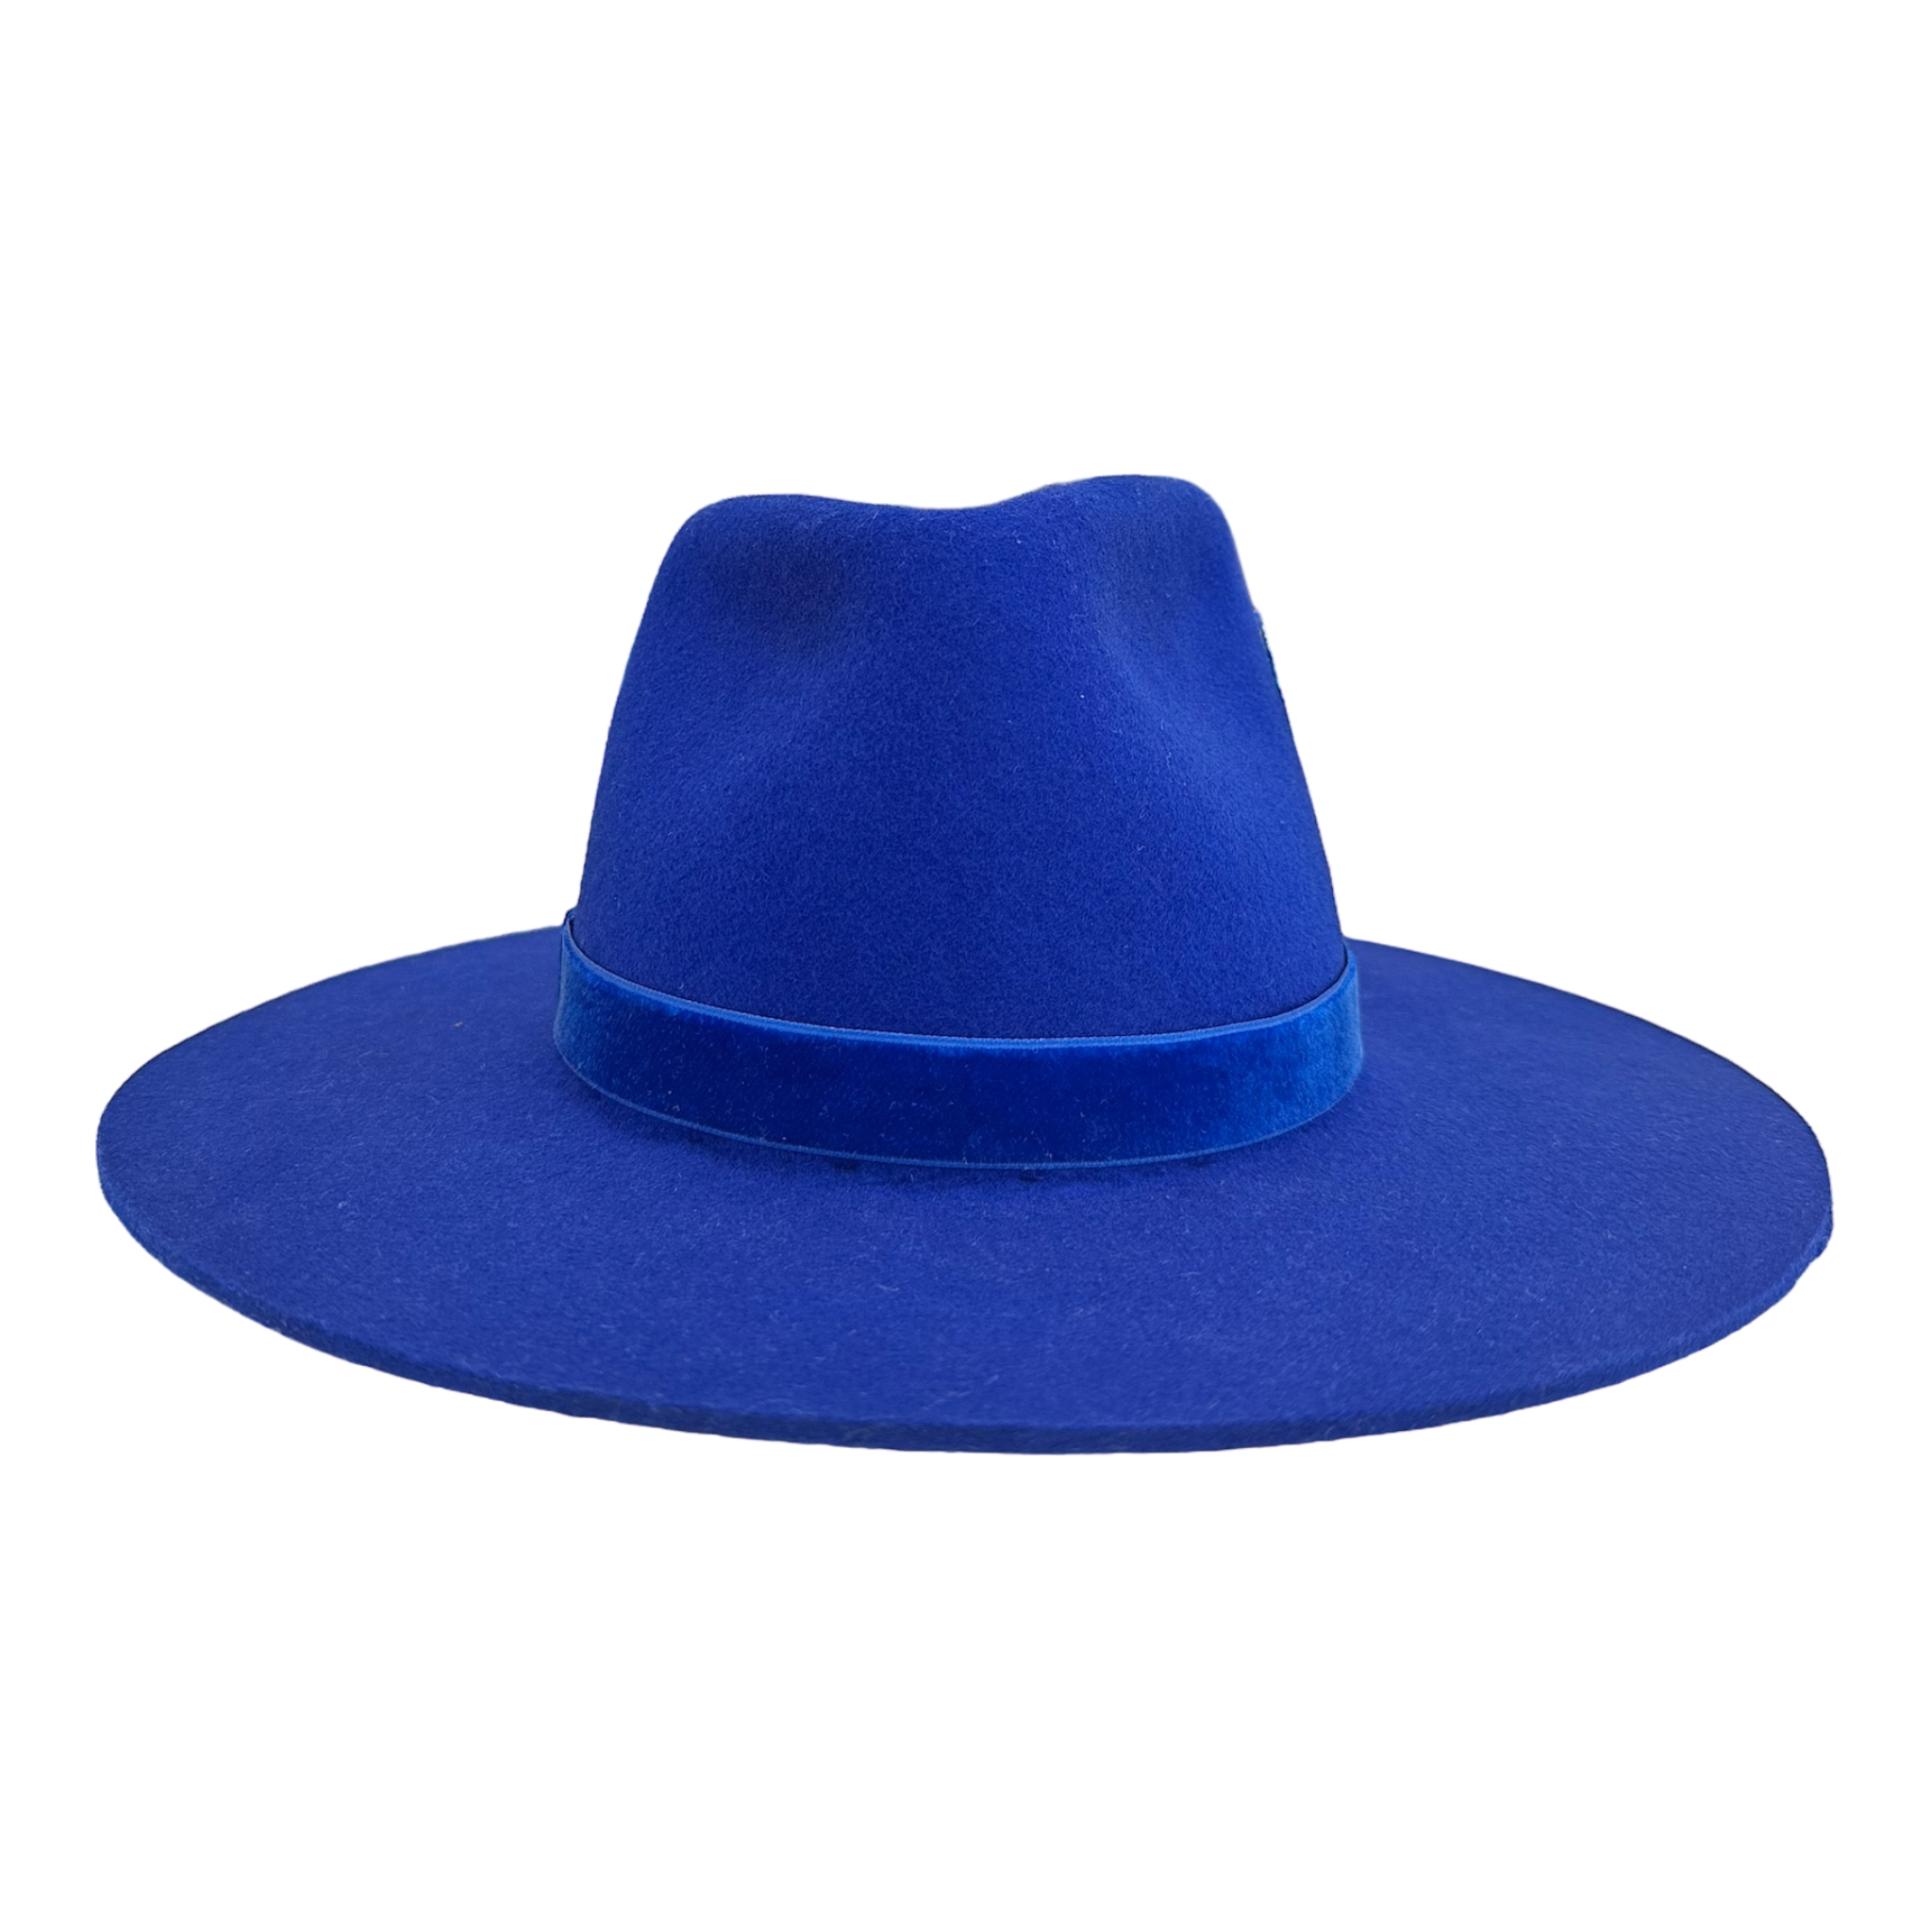 Amore Mio - Adult Fedora Hat By Bruce And Noah